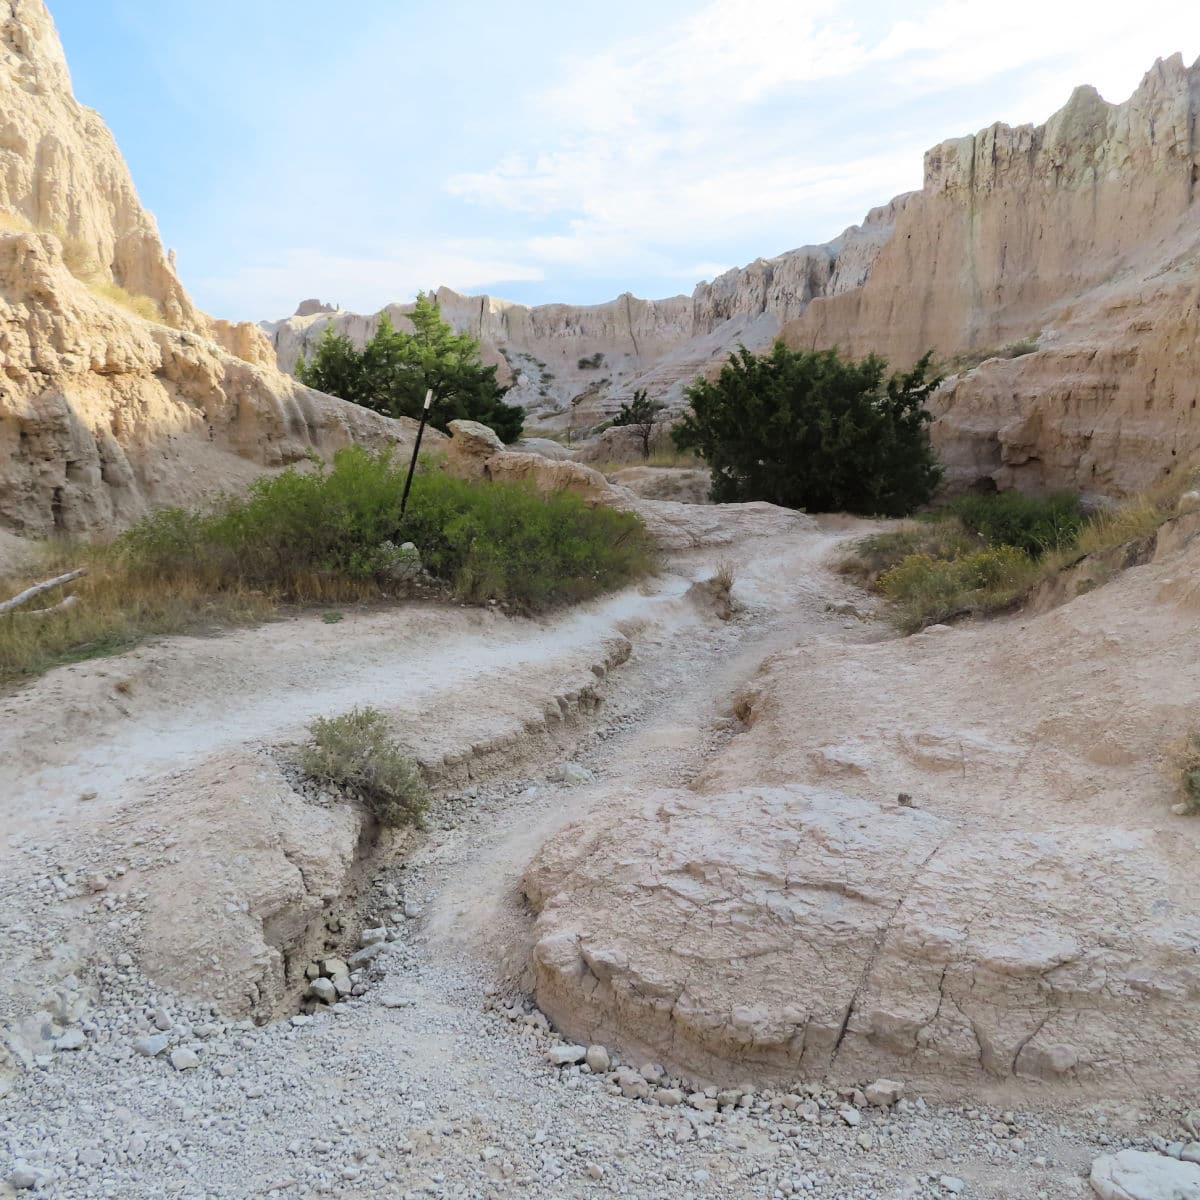 Incredible scenery along the Notch Trail in Badlands National PArk